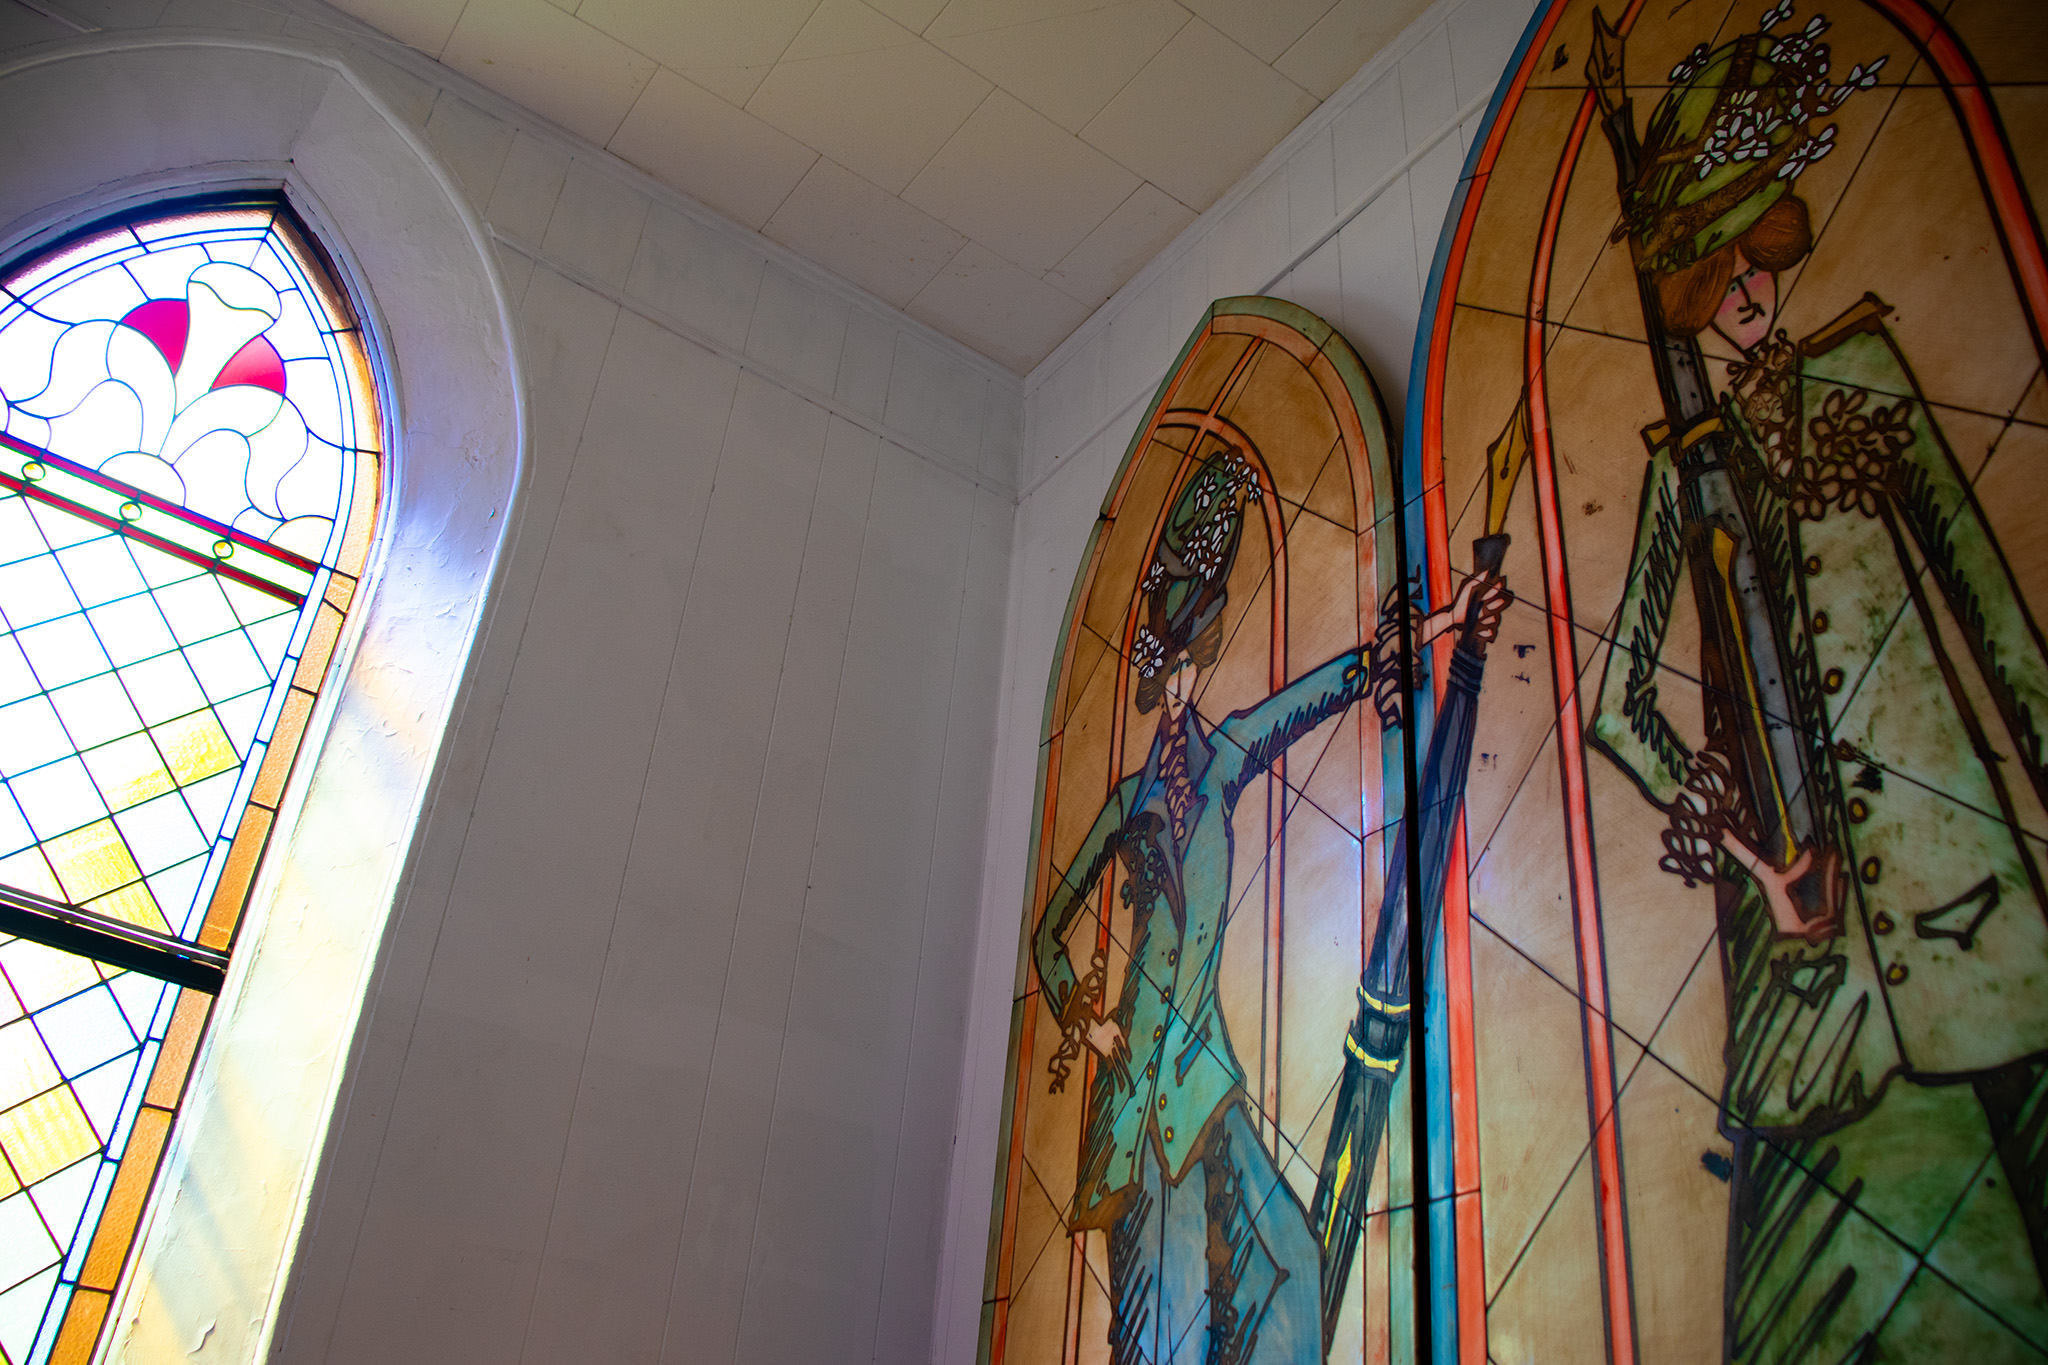 Image of the Lucy Maud Montgomery Mural inside Historic Leaskdale Church.